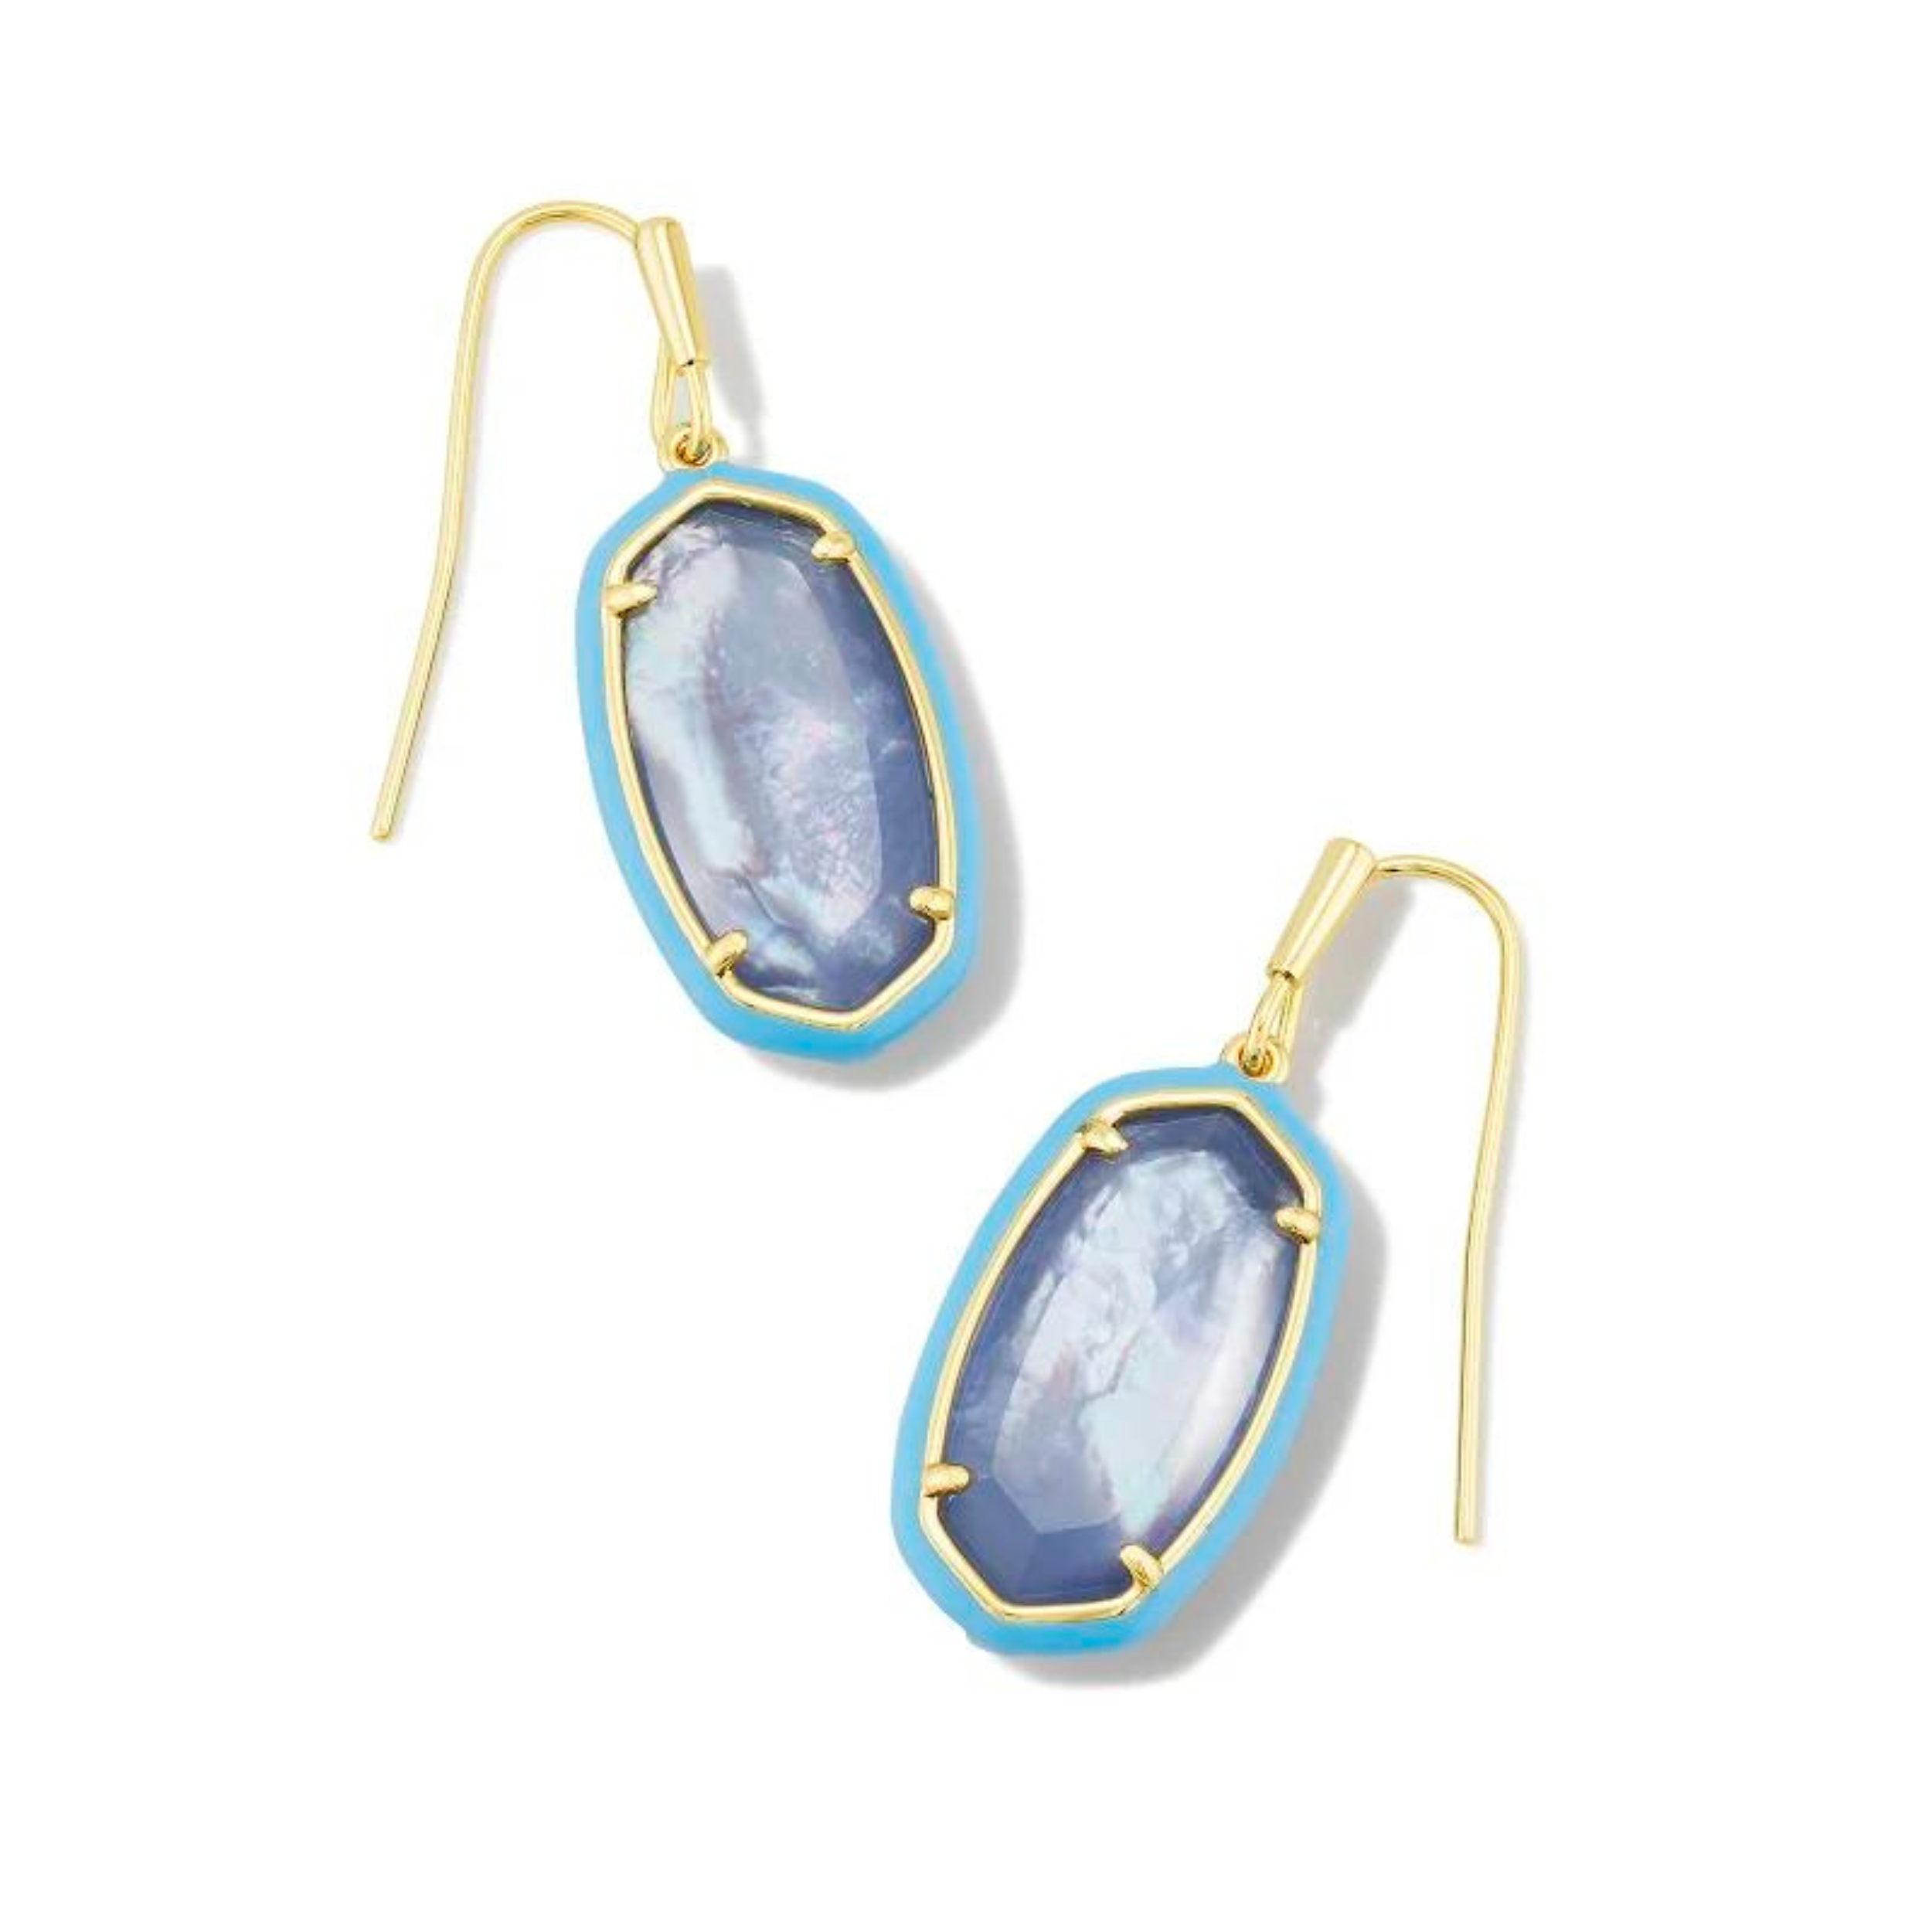 Light blue framed, oval shaped drop earrings with a center light blue stone and a gold fish hook earring. These earrings are pictured on a white background. 